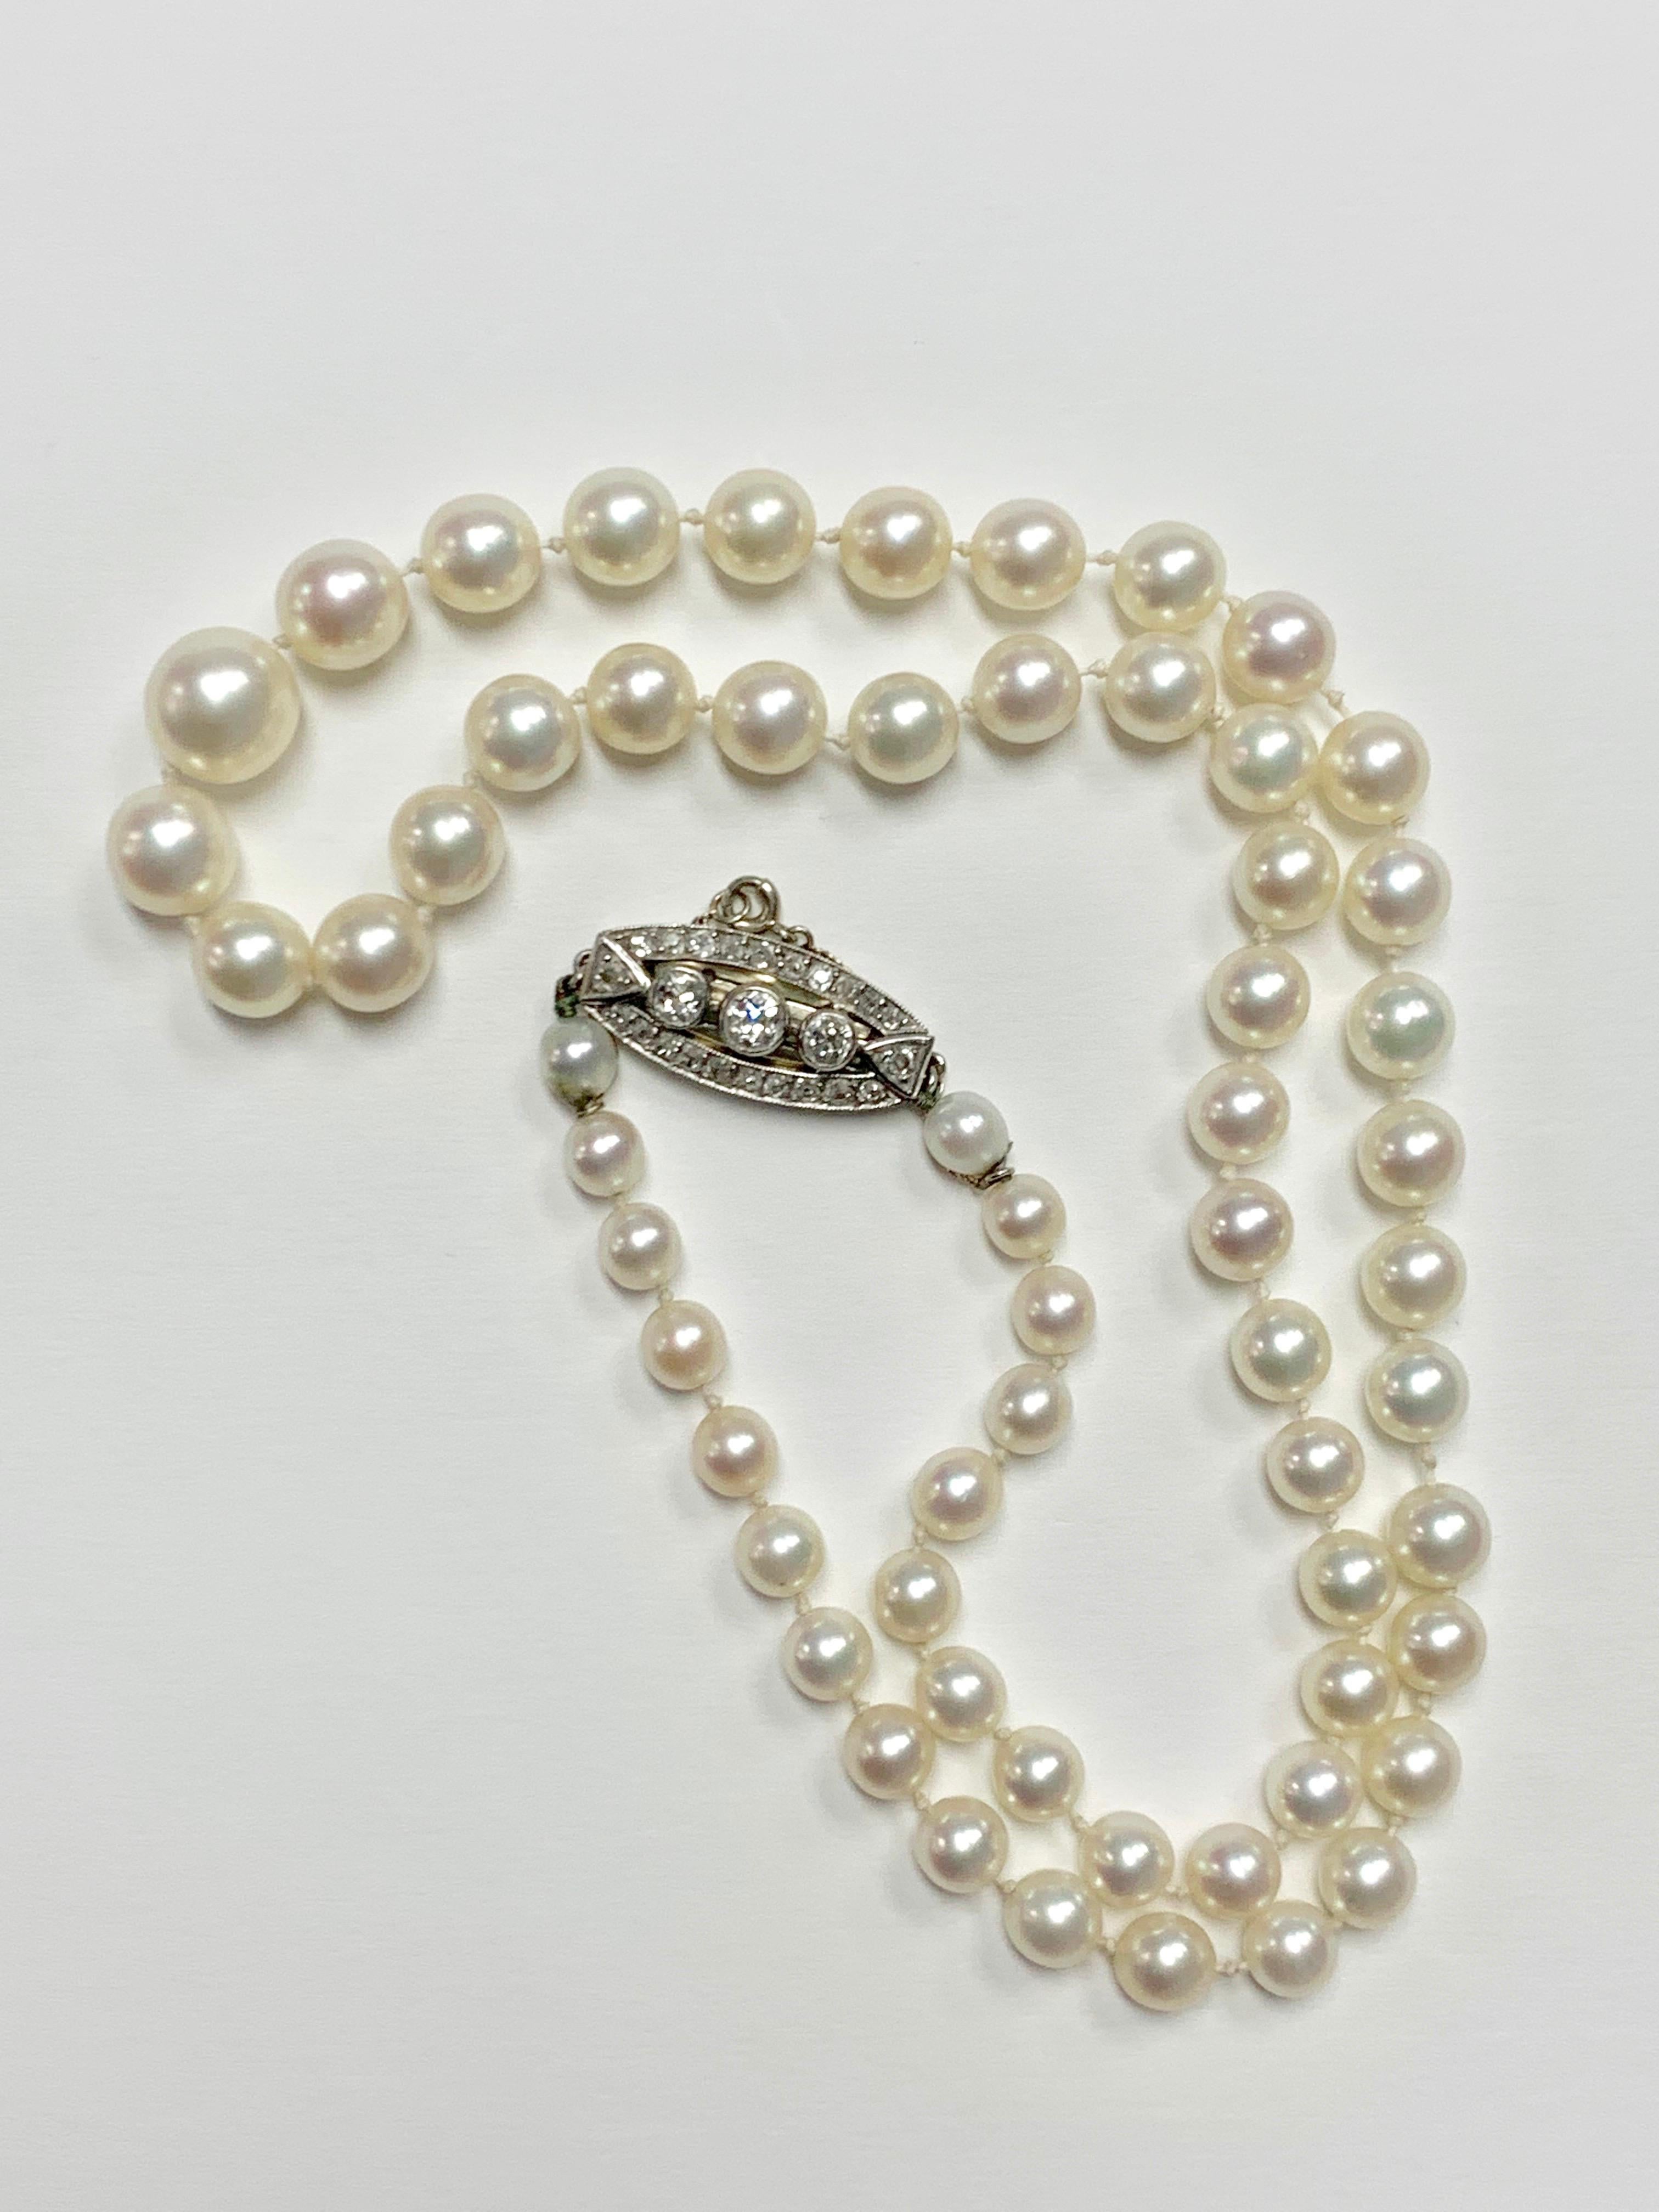 1920 Cultured Pearl and Diamond Necklace in Platinum, GIA Certified.  1